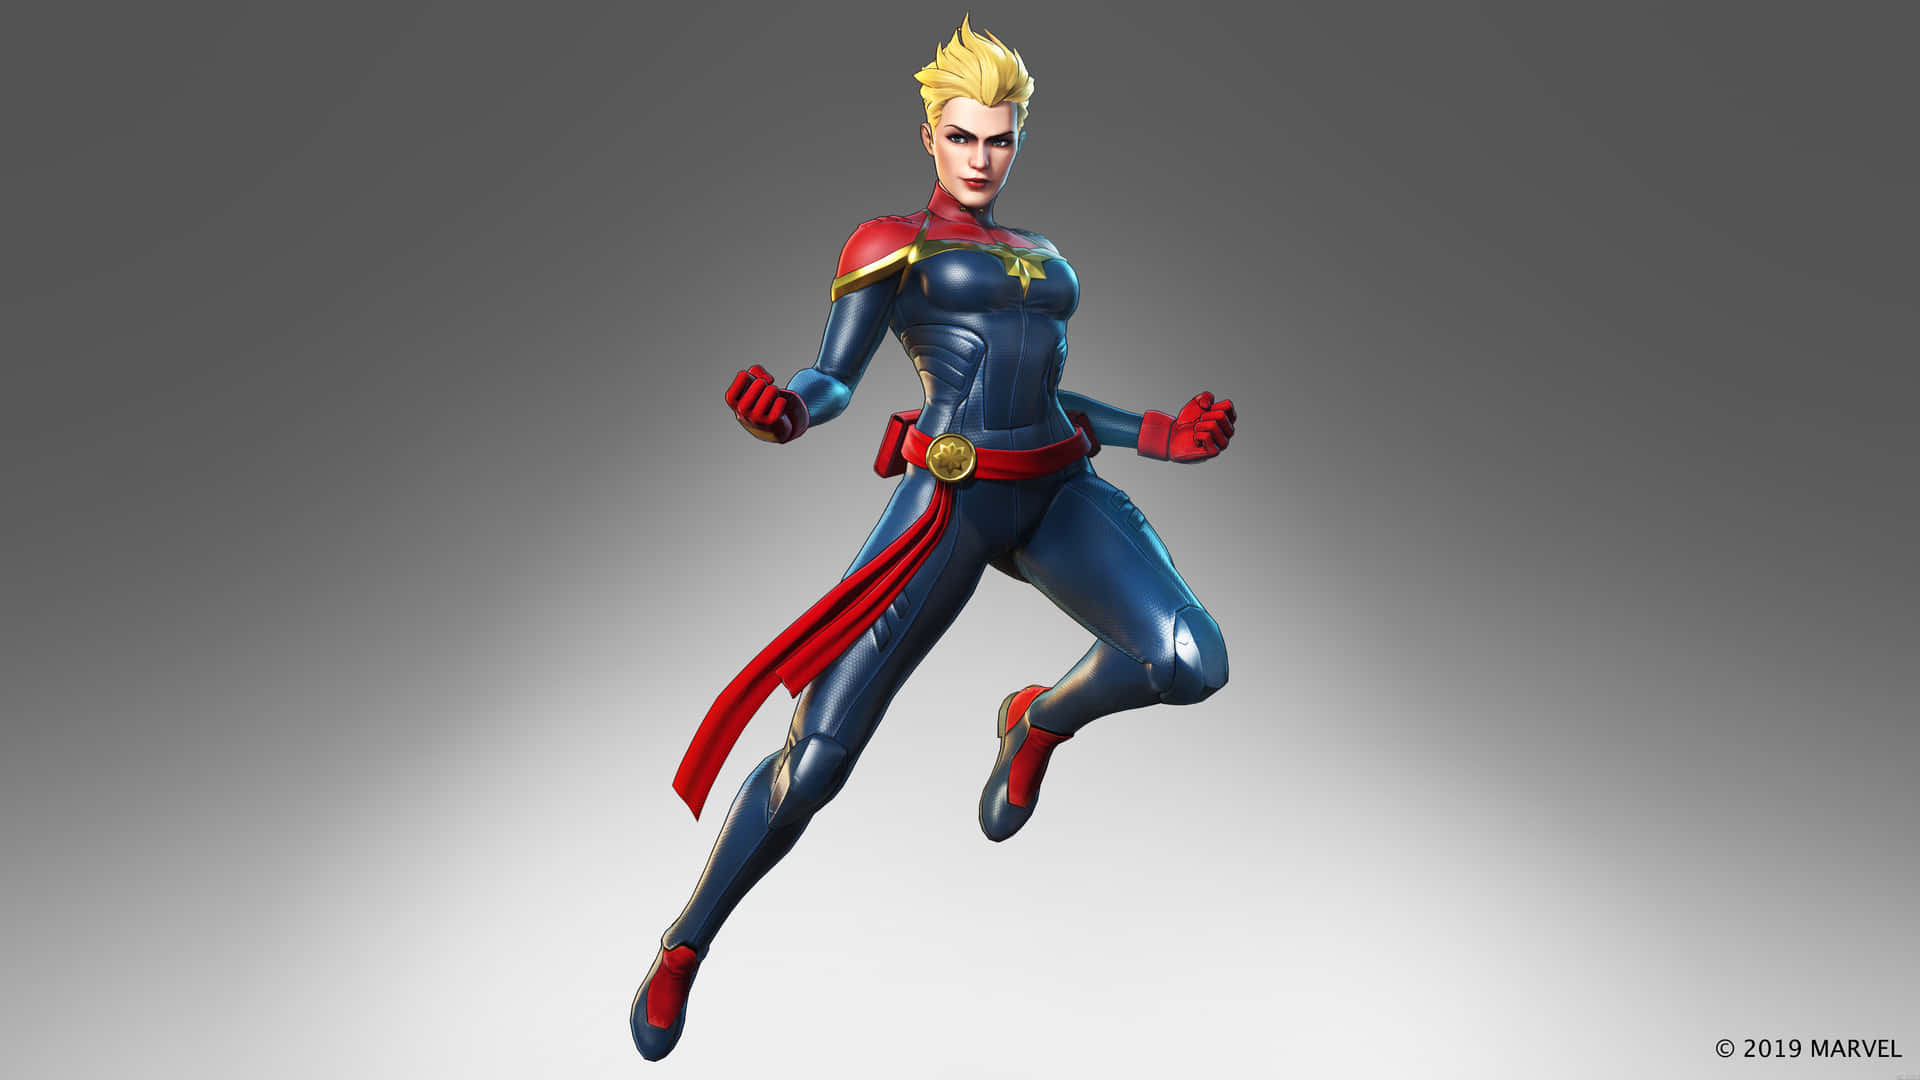 Explore The Exciting Intergalactic World of Captain Marvel in 3D Wallpaper